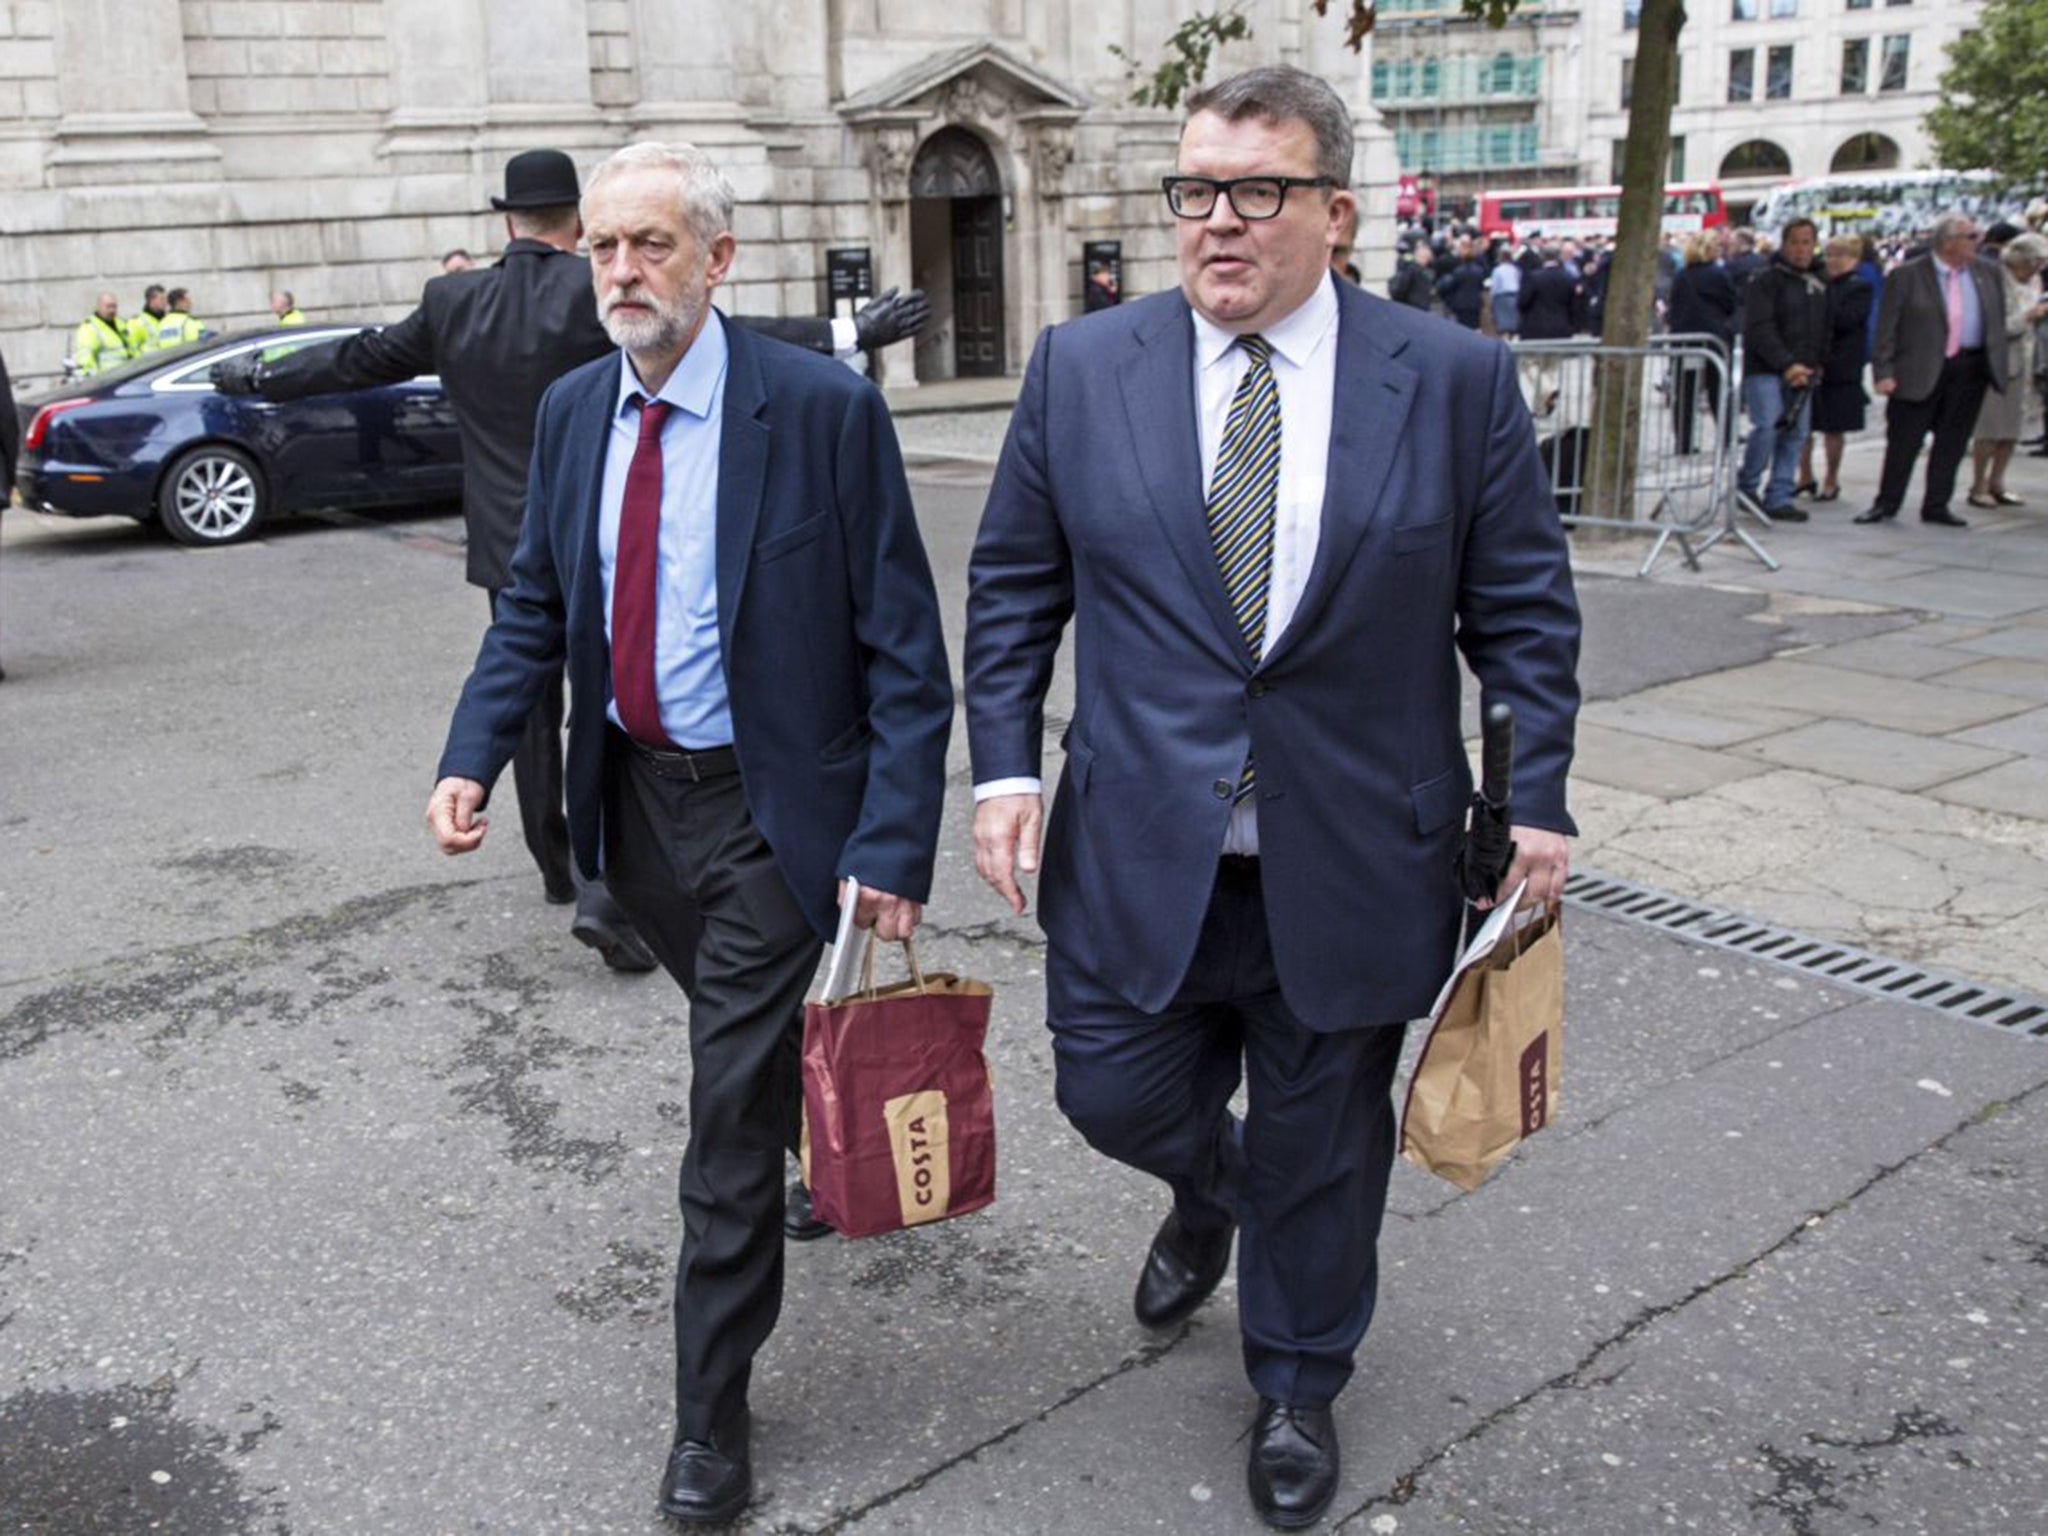 Tom Watson, Labour’s deputy leader, right, said Mr Cameron’s broken promise on the issue would “yet again weaken the public trust in politics” (Getty)